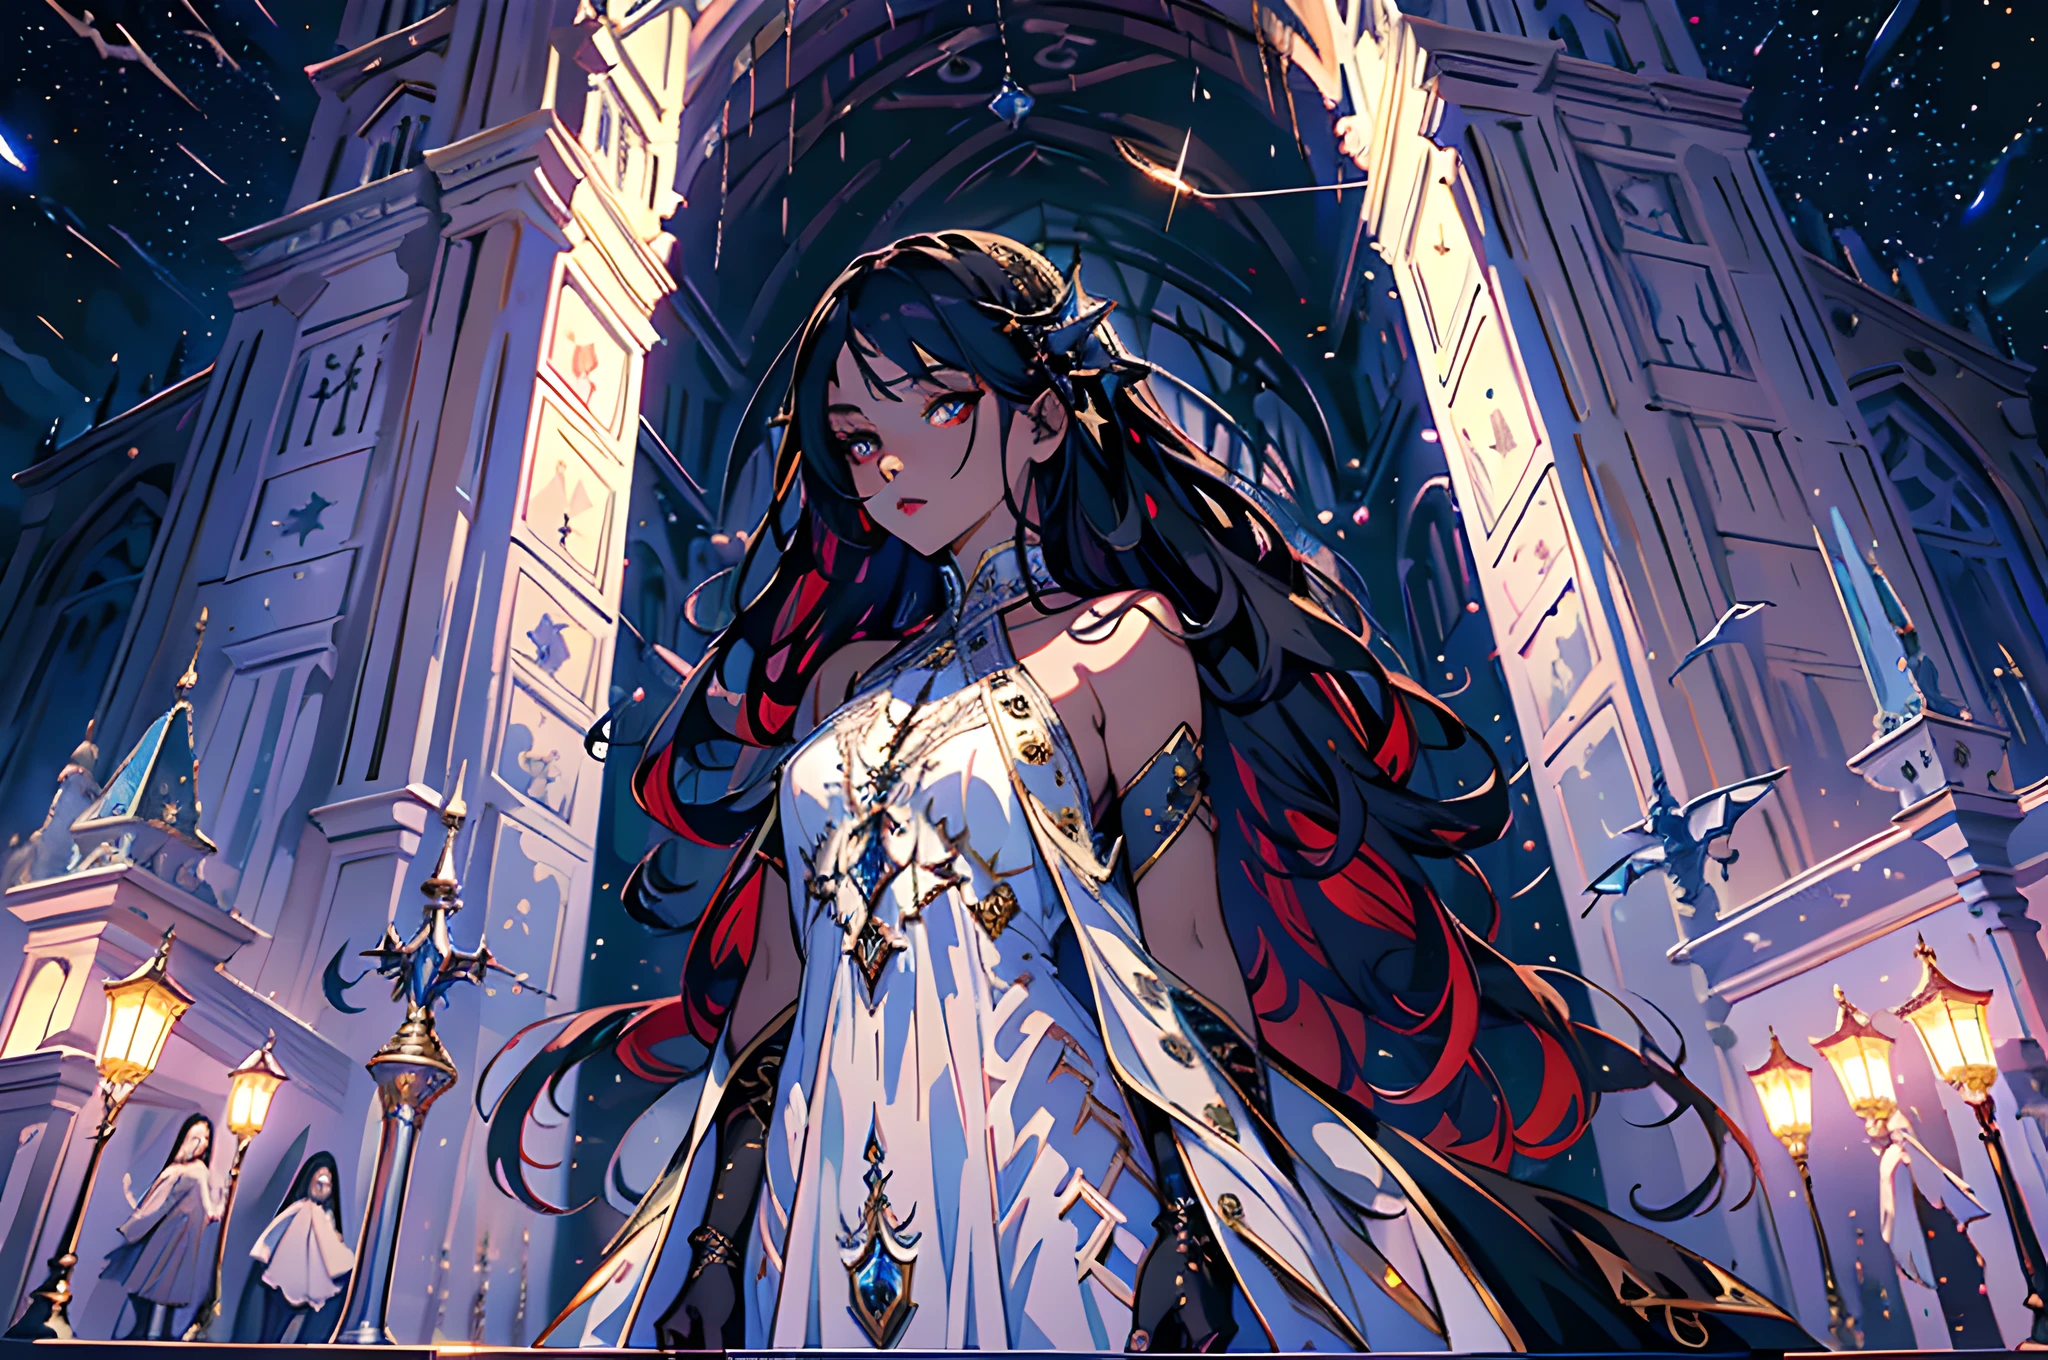 a picture of an exquisite beautiful female vampire standing under the starry night sky on the porch of her castle, dynamic angle (ultra detailed, Masterpiece, best quality), ultra detailed face (ultra detailed, Masterpiece, best quality), ultra feminine, dark skin, black  hair, wavy hair, dynamic eyes color, cold eyes, glowing eyes, intense eyes, dark red lips, fangs, wearing white dress, elegant style dress (ultra detailed, Masterpiece, best quality), wearing blue cloak (ultra detailed, Masterpiece, best quality), long cloak, flowing cloak (ultra detailed, Masterpiece, best quality), wearing high heeled boots, sky full of stars background, moon, bats flying about, high details, best quality, 8k, [ultra detailed], masterpiece, best quality, (ultra detailed), full body, ultra wide shot, photorealism, dark fantasy art, dark fantasy art, gothic art, many stars, dark fantasy art, gothic art, sense of dread,